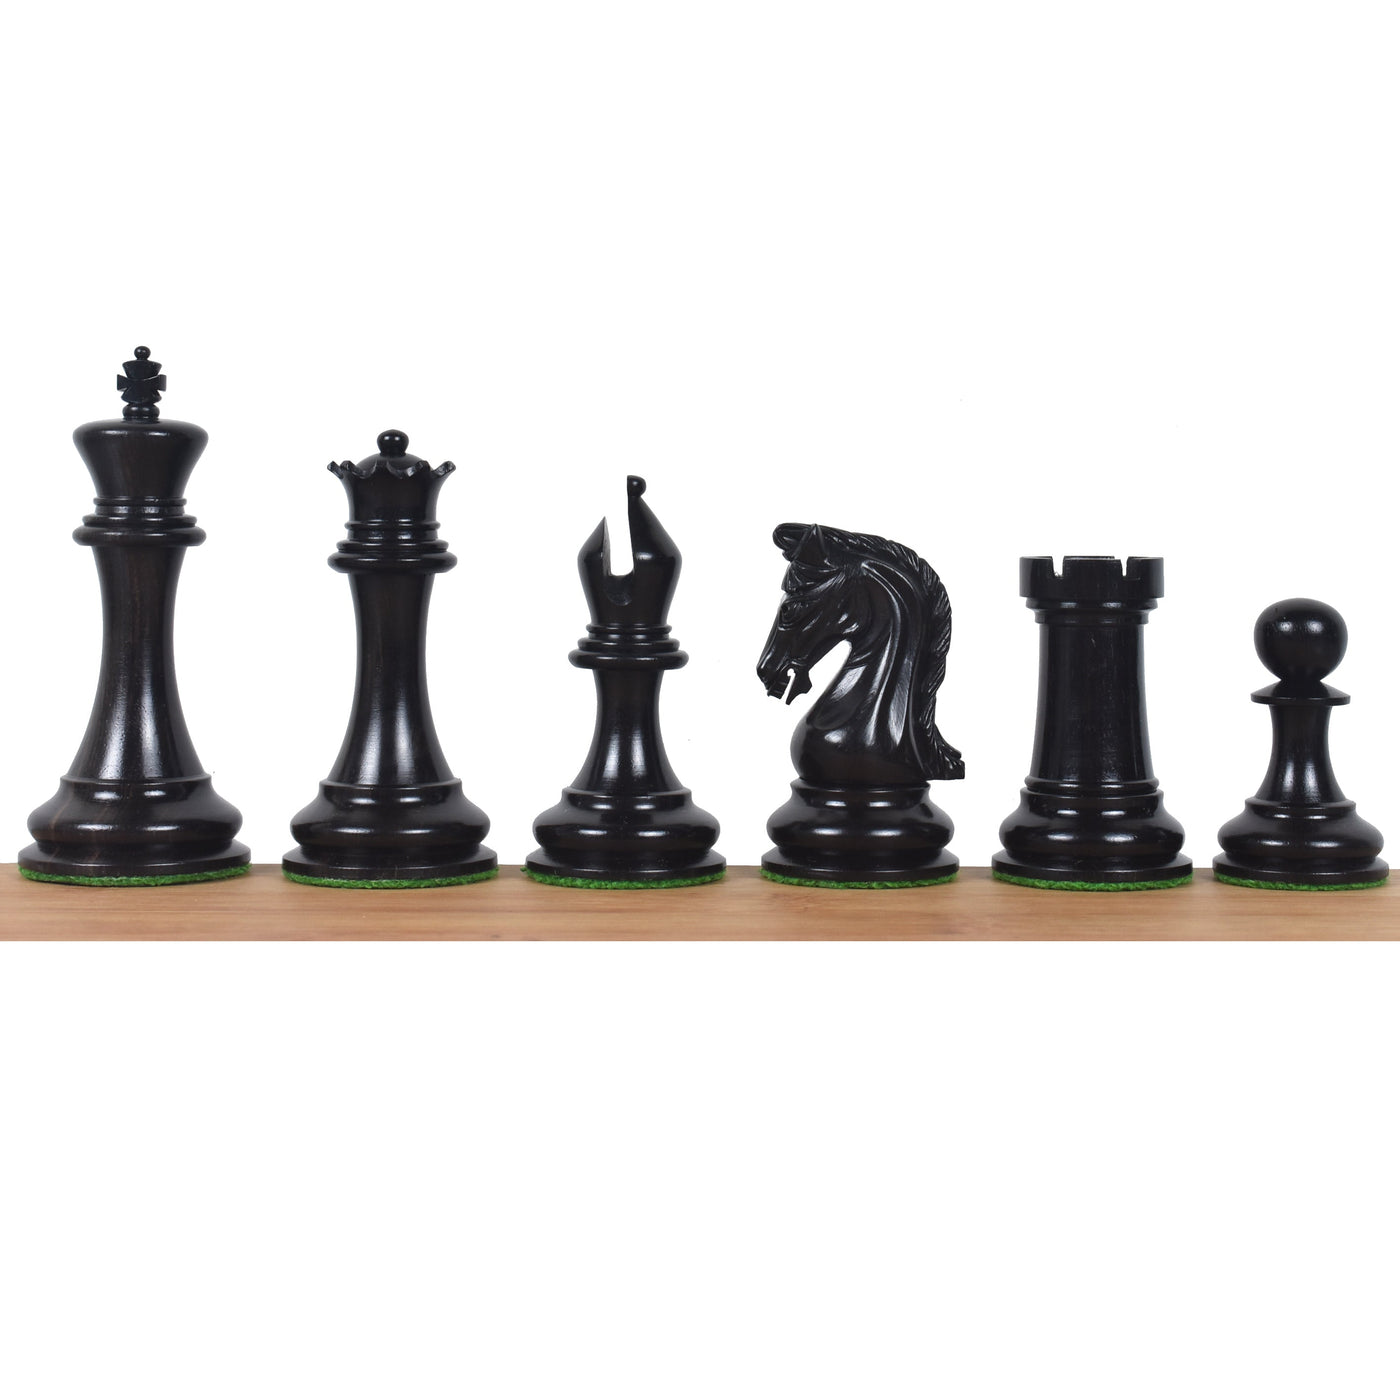 Slightly Imperfect Repro 2016 Sinquefield Staunton Chess Set - Chess Pieces Only - Ebony Wood - Triple Weight